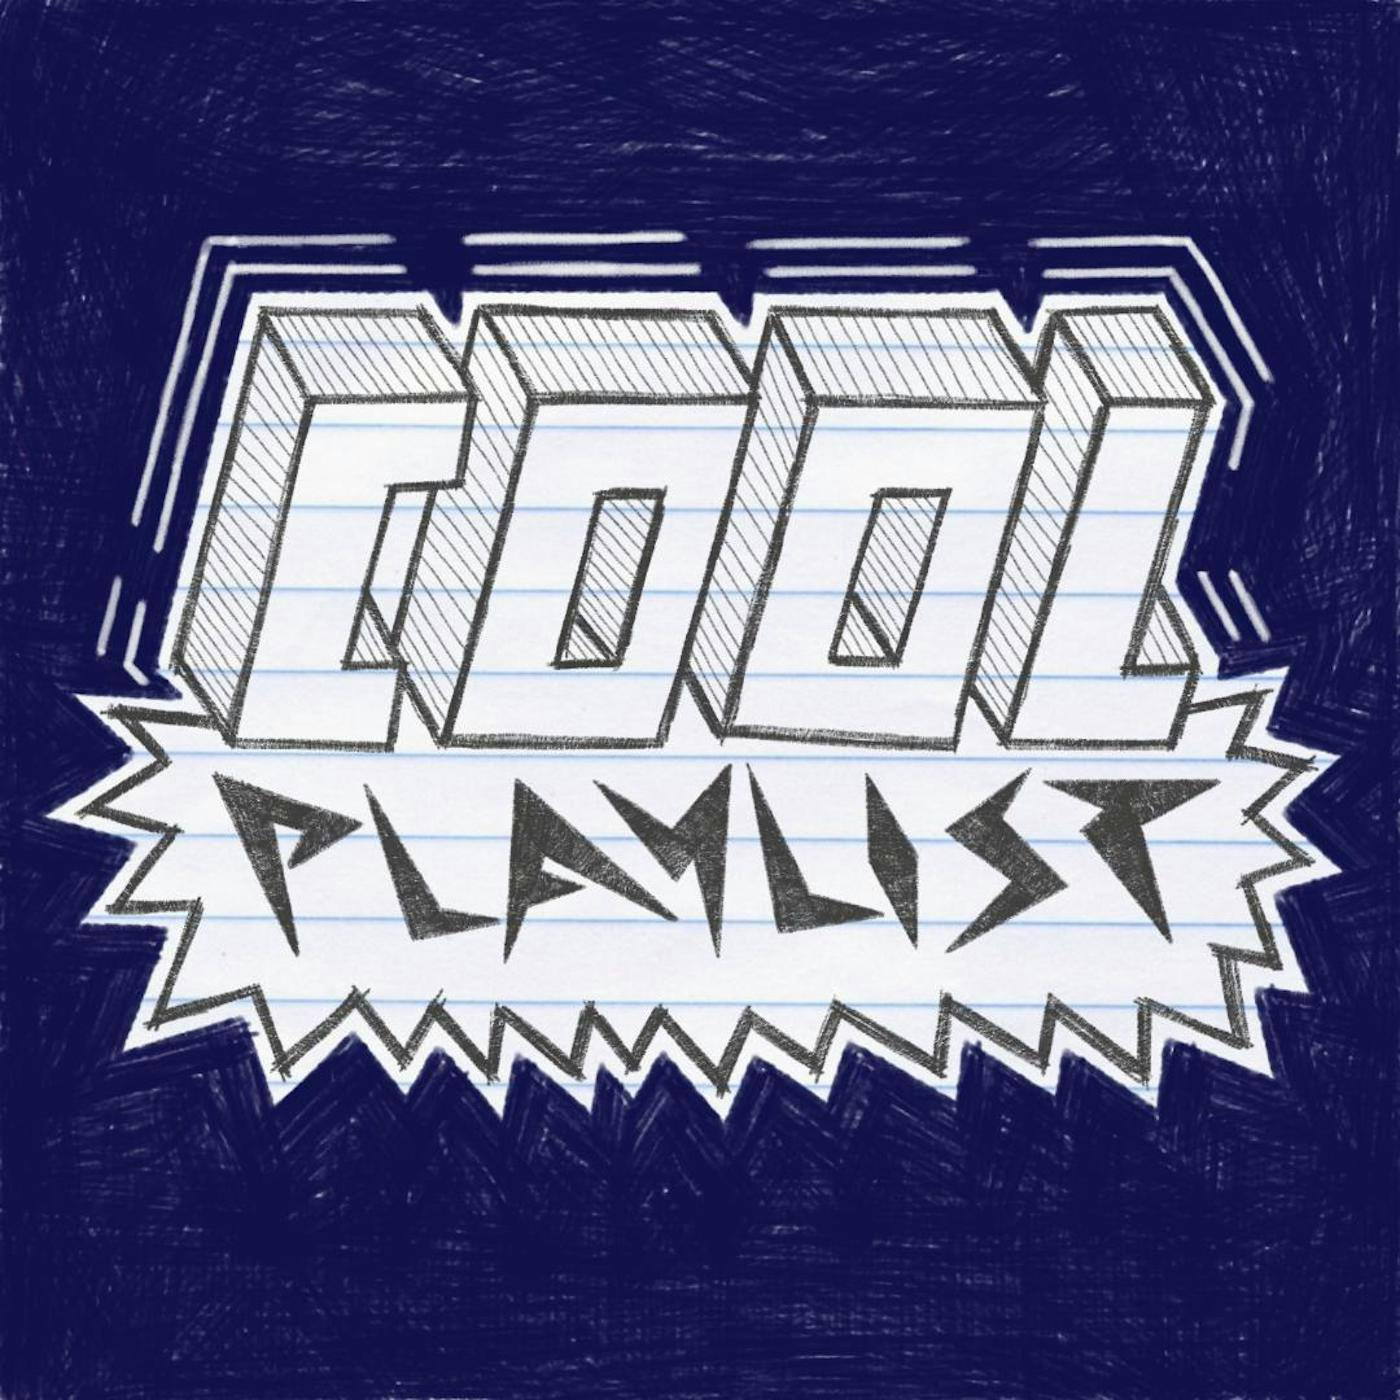 Welcome to Cool Playlist!